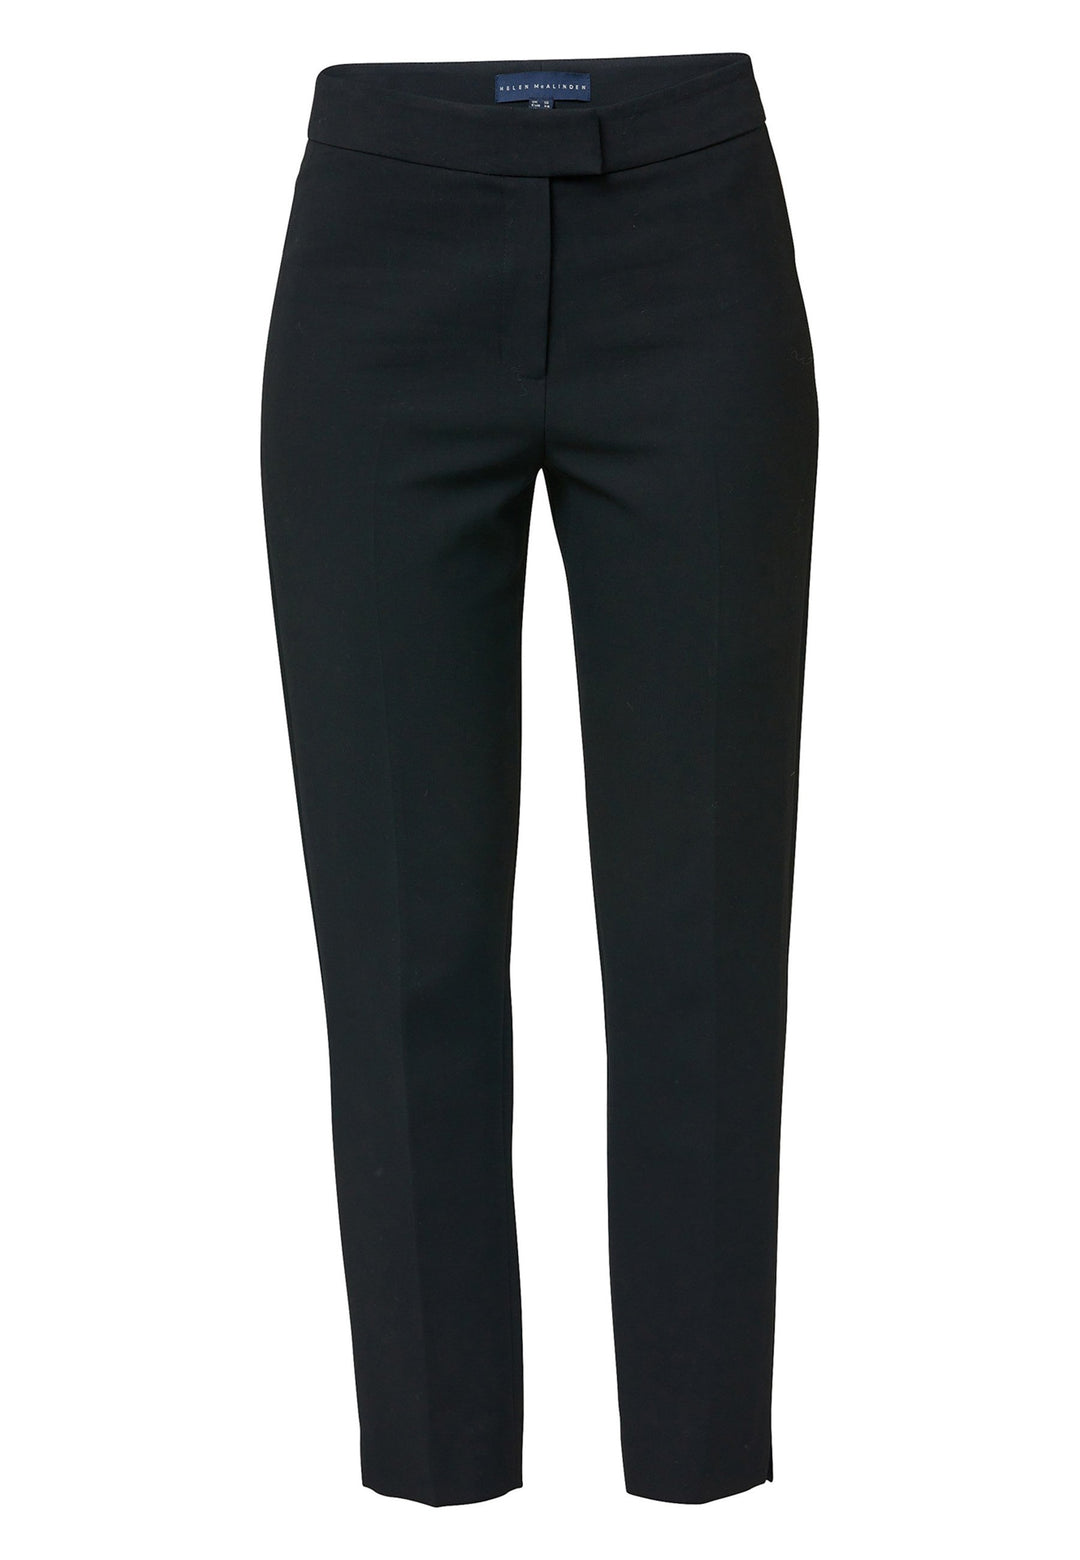 Jill makes a triumphant return! These narrow leg trousers are a must-have for investment-worthy style, providing a sleek and impeccably tailored silhouette. With an ankle-grazing length, a fly front, and a clean flat front that sits naturally on the waist, these trousers exude sophistication. They feature a jeet pocket on the back and a slit at the hem, adding subtle yet stylish details. In a chic black , Jill embodies elegance in every way.